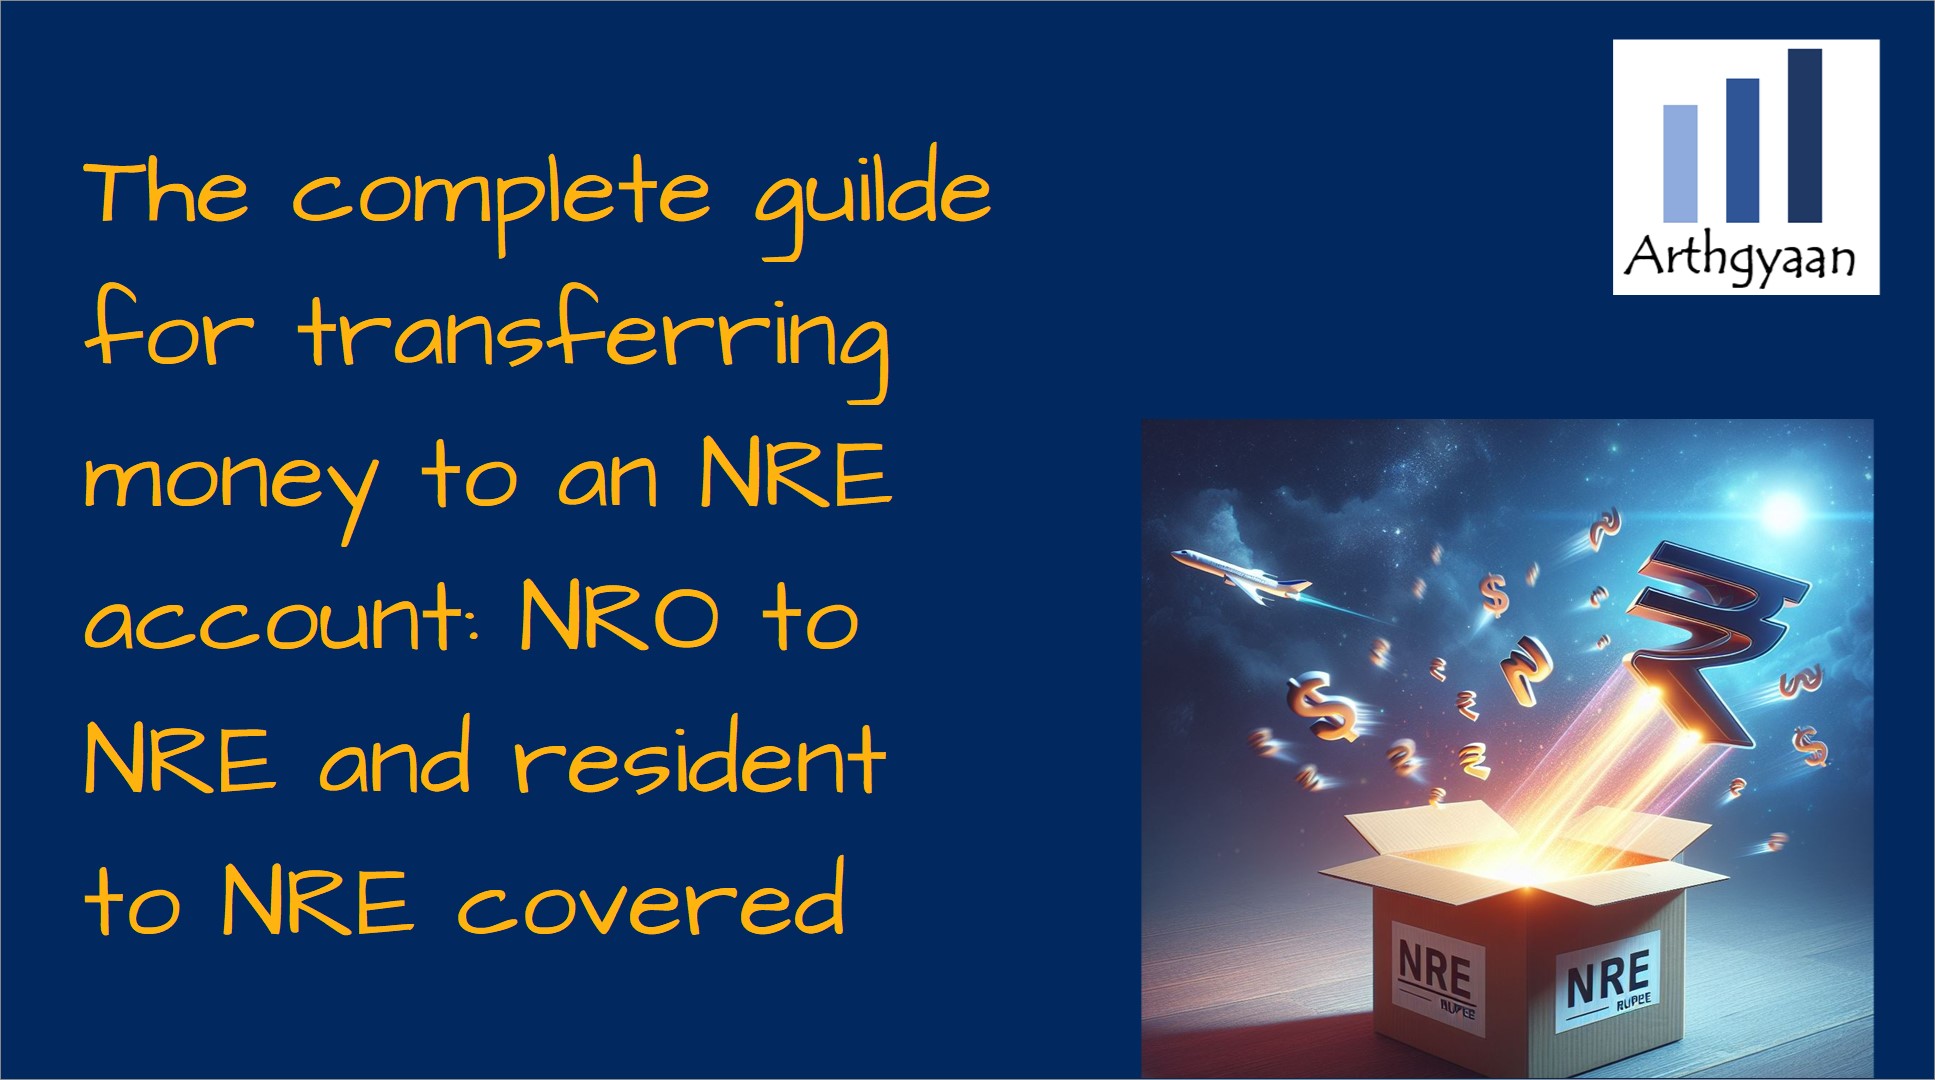 The complete guide for transferring money to an NRE account: NRO to NRE and resident to NRE covered